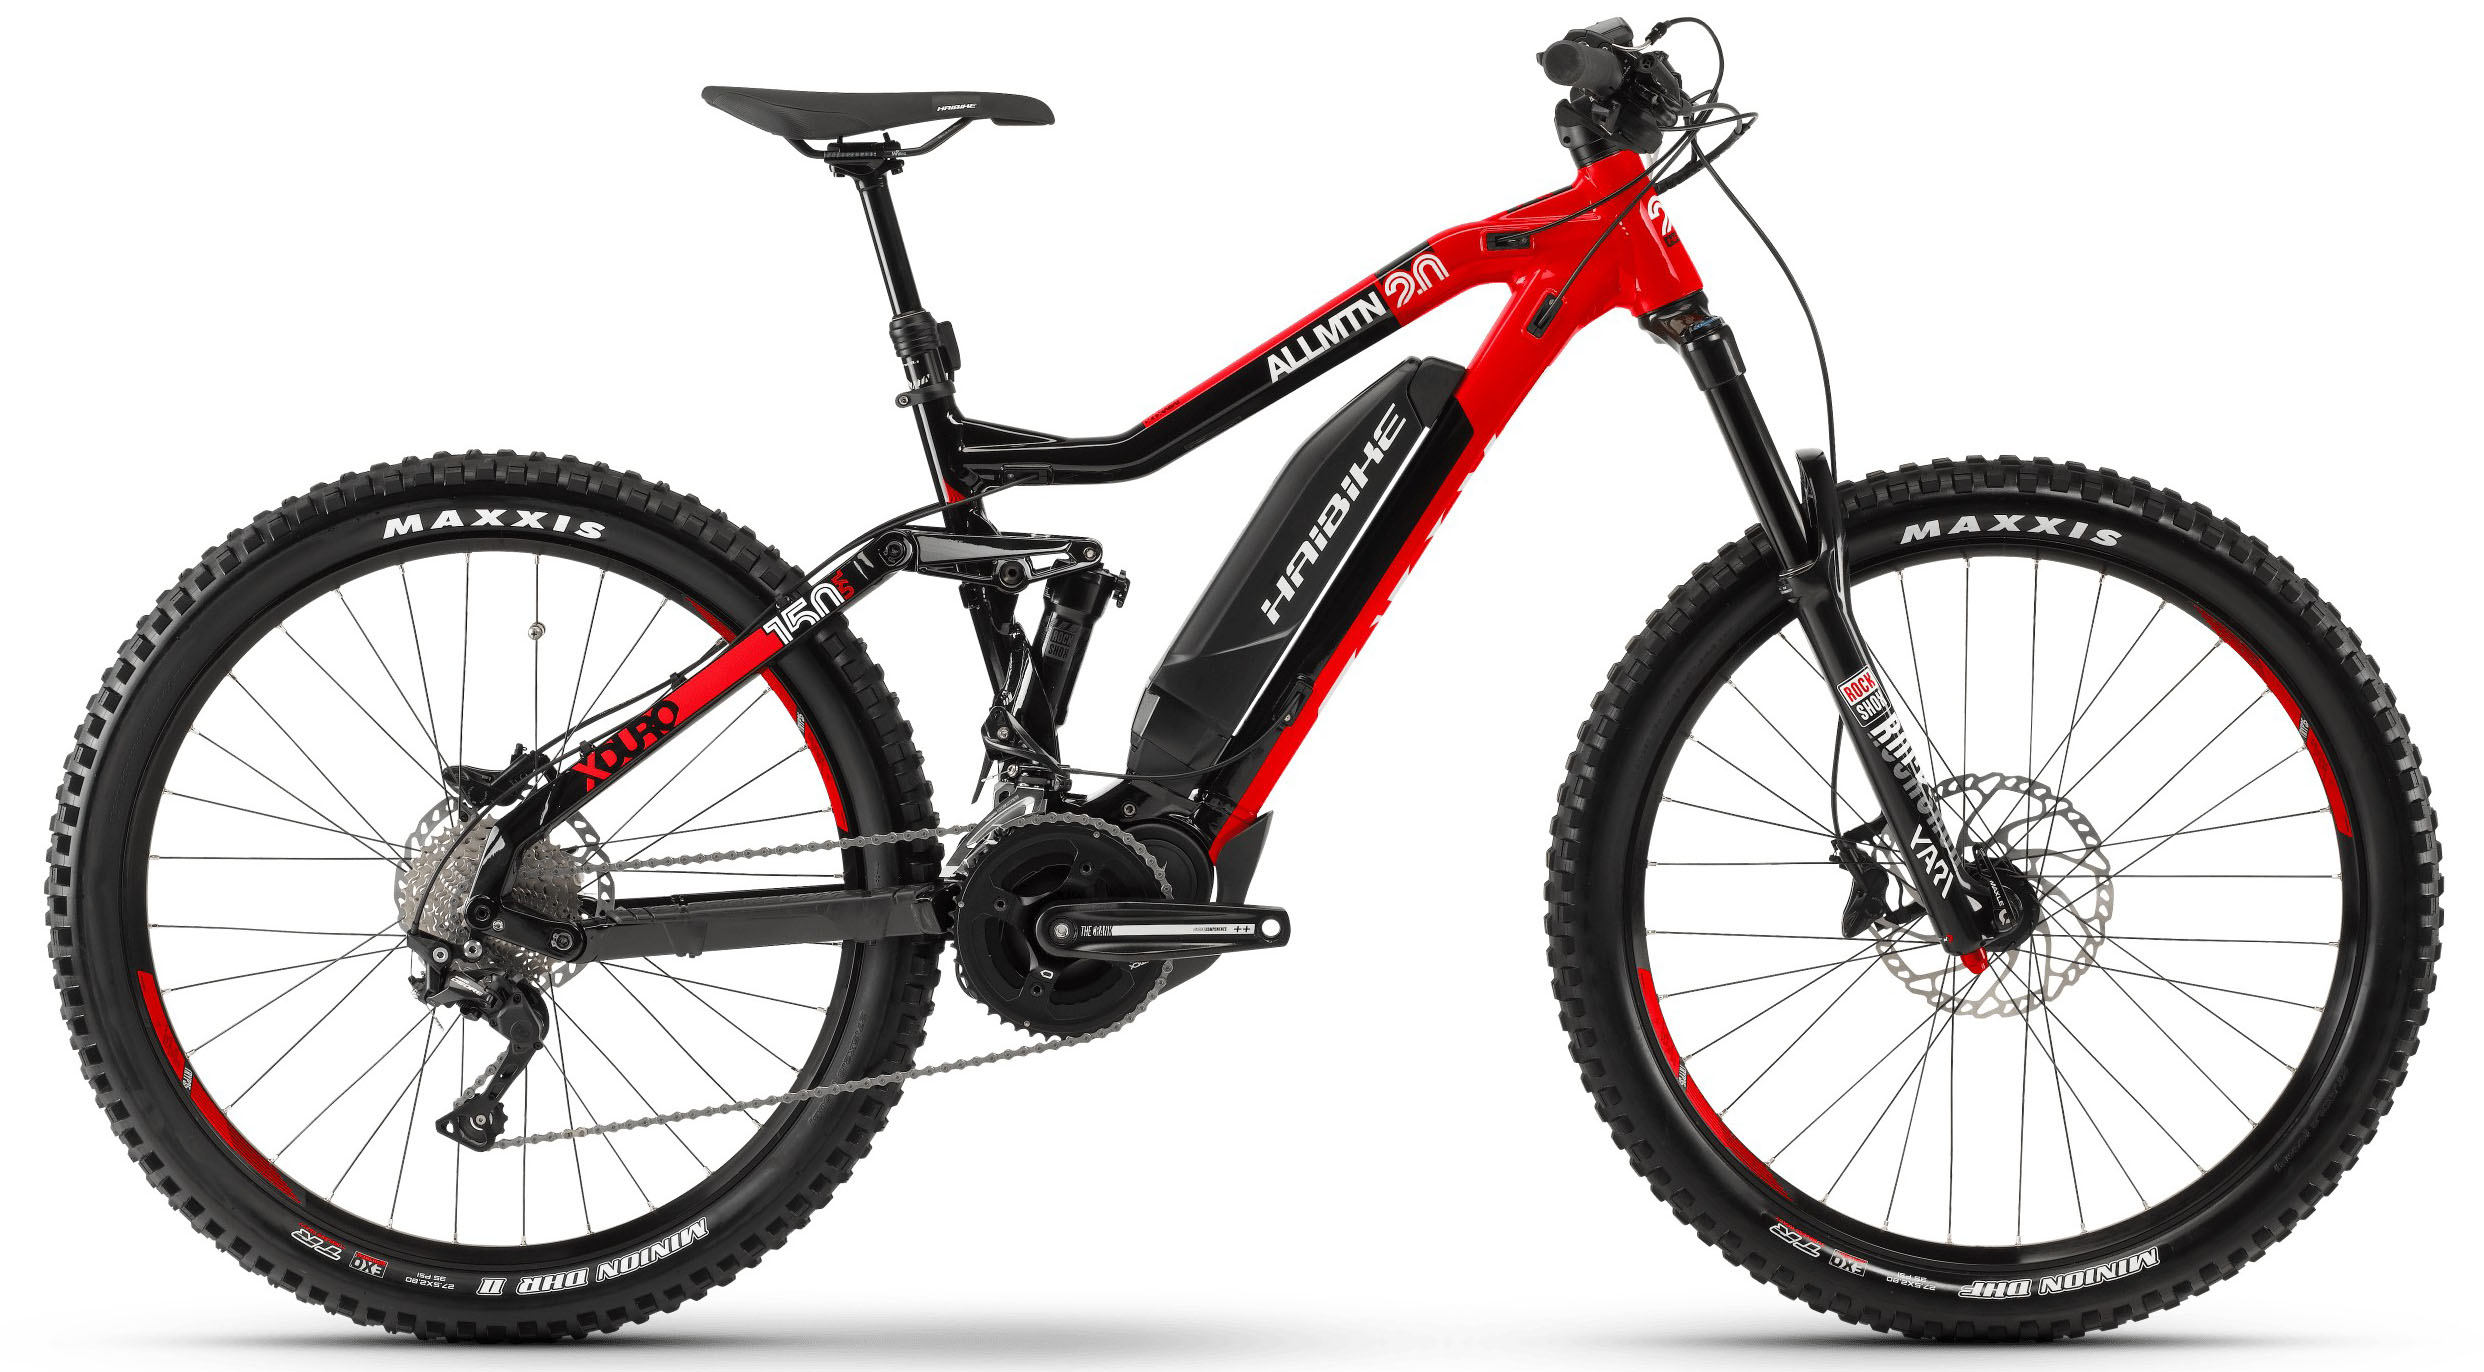  Велосипед Haibike XDURO AllMtn 2.0 500Wh 20-G Deore 2019